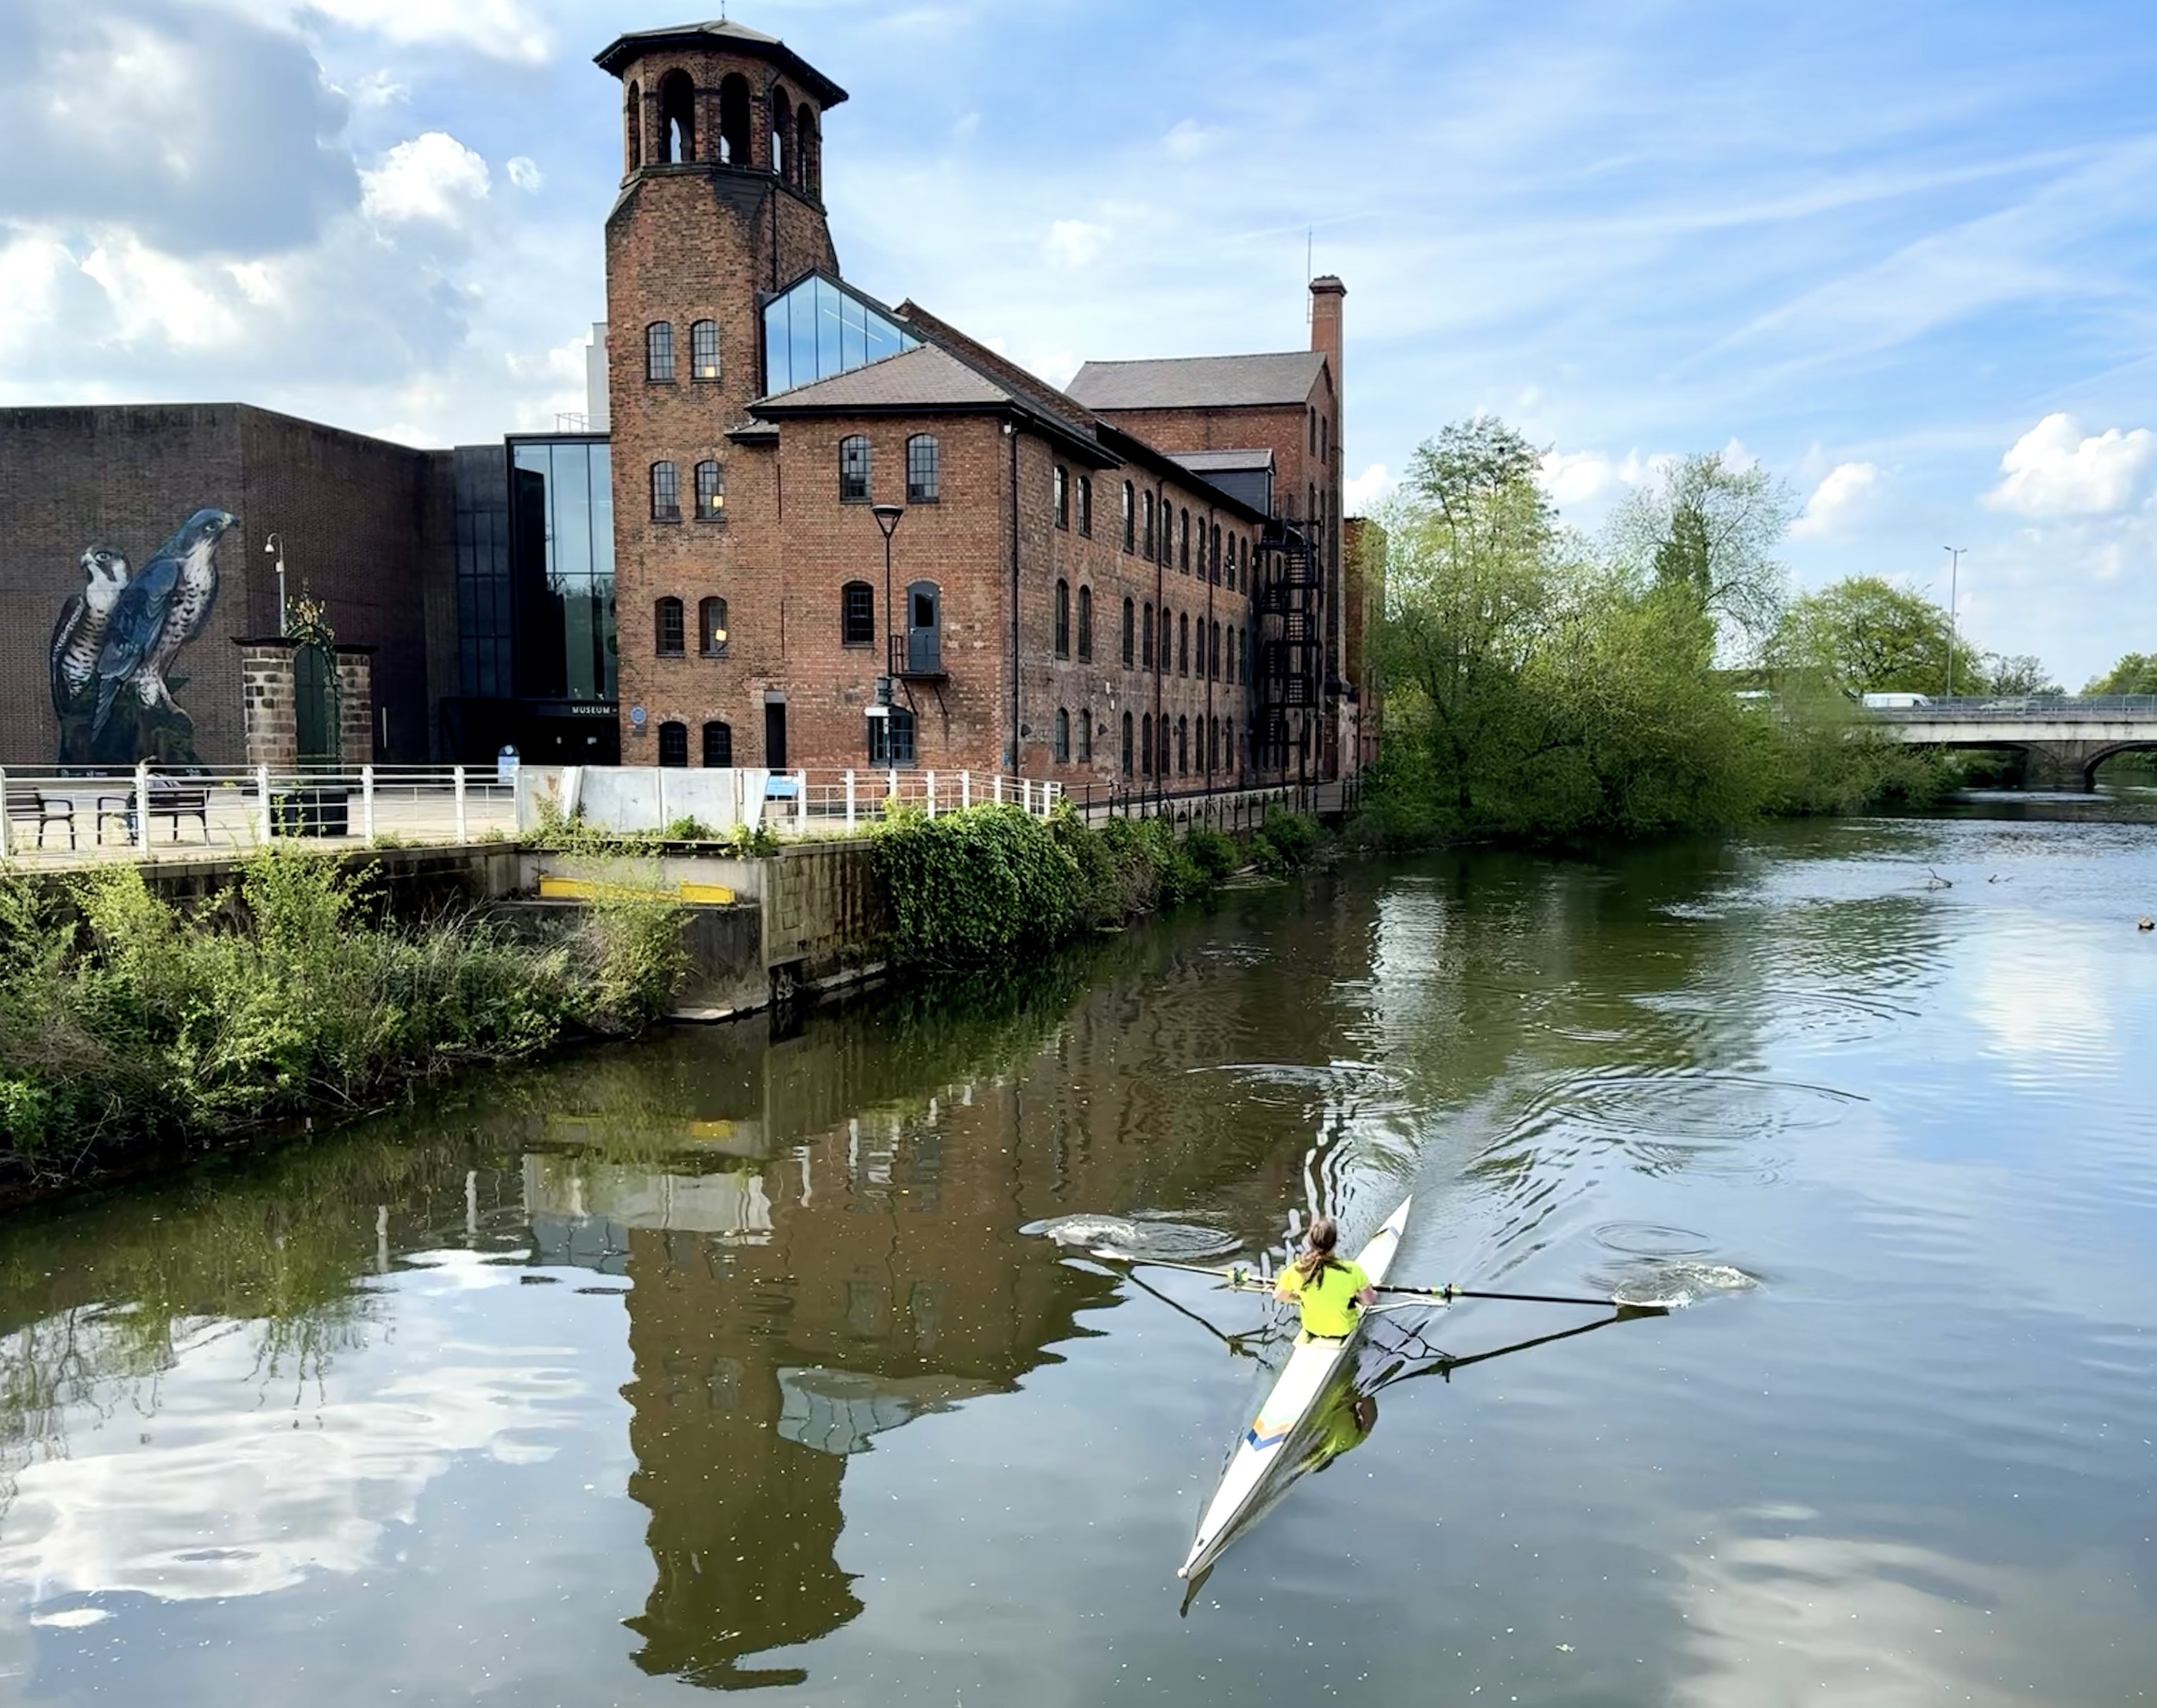 A view of the Silk Mill from the footbridge over the River Derwent with a single rower in the foreground.